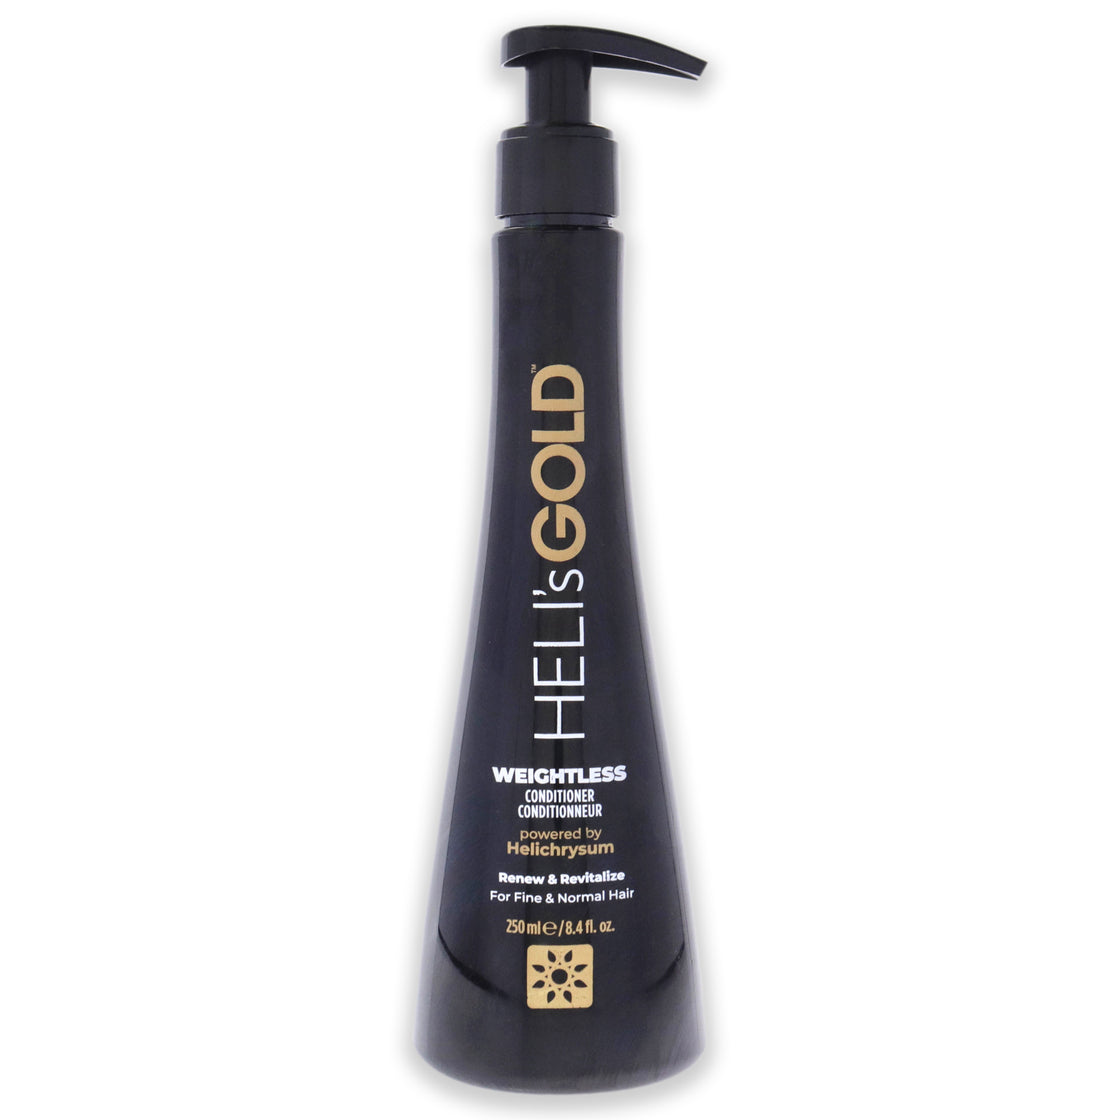 Weightless Conditioner by Helis Gold for Unisex - 8.4 oz Conditioner